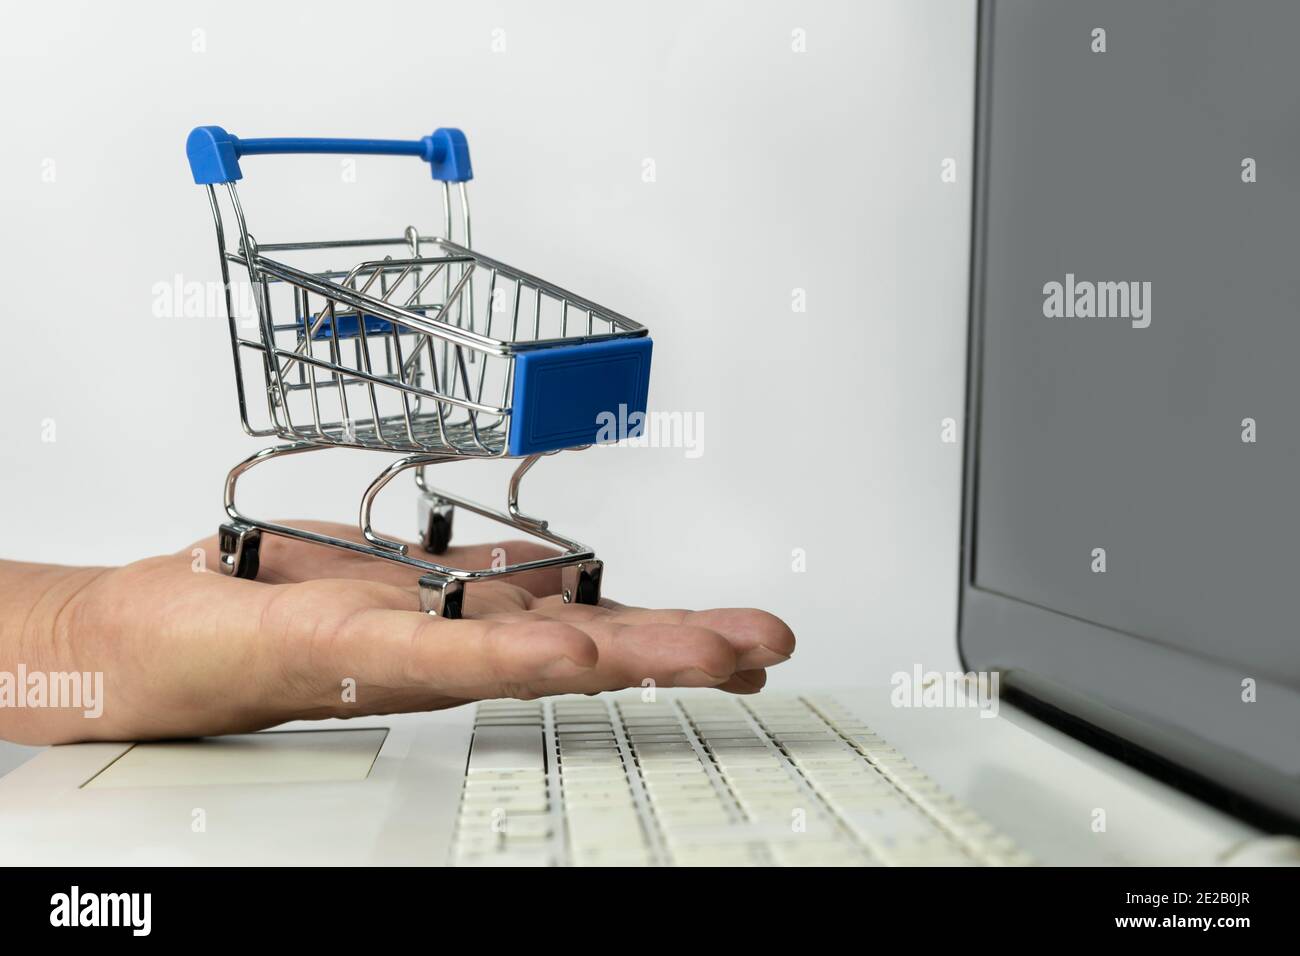 Shopping online concept lifestyle.Hand holding mini shopping cart trolley on laptop.E-commerce ,online working business ,spend money mock up template Stock Photo